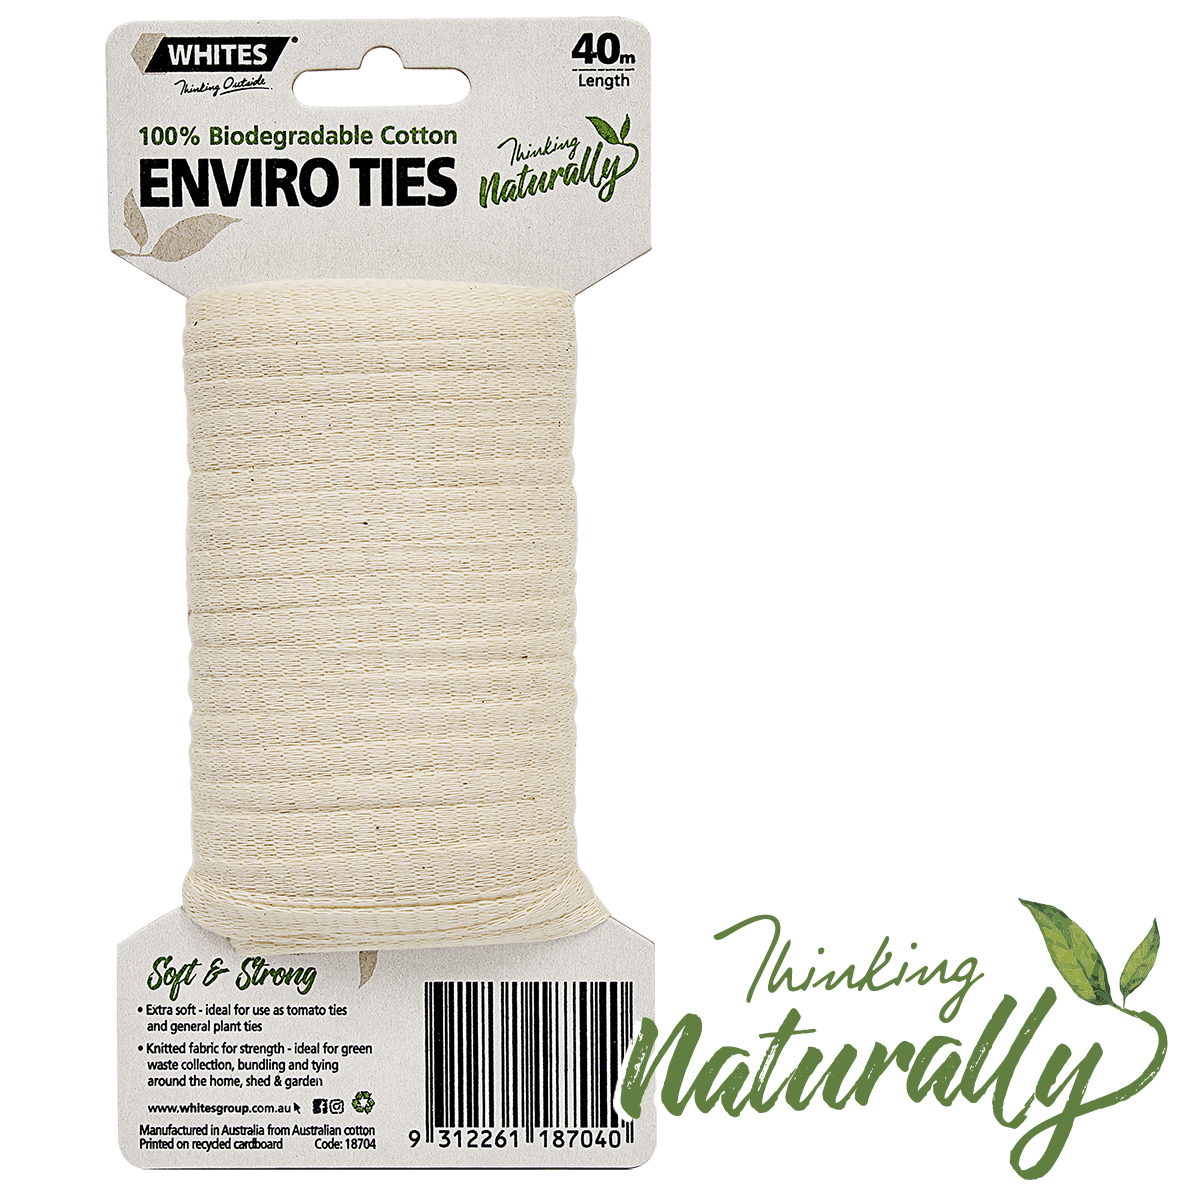 Whites Outdoor ENVIRO TIE 40m 100% Biodegradable Cotton Soft & Strong Aust Brand 